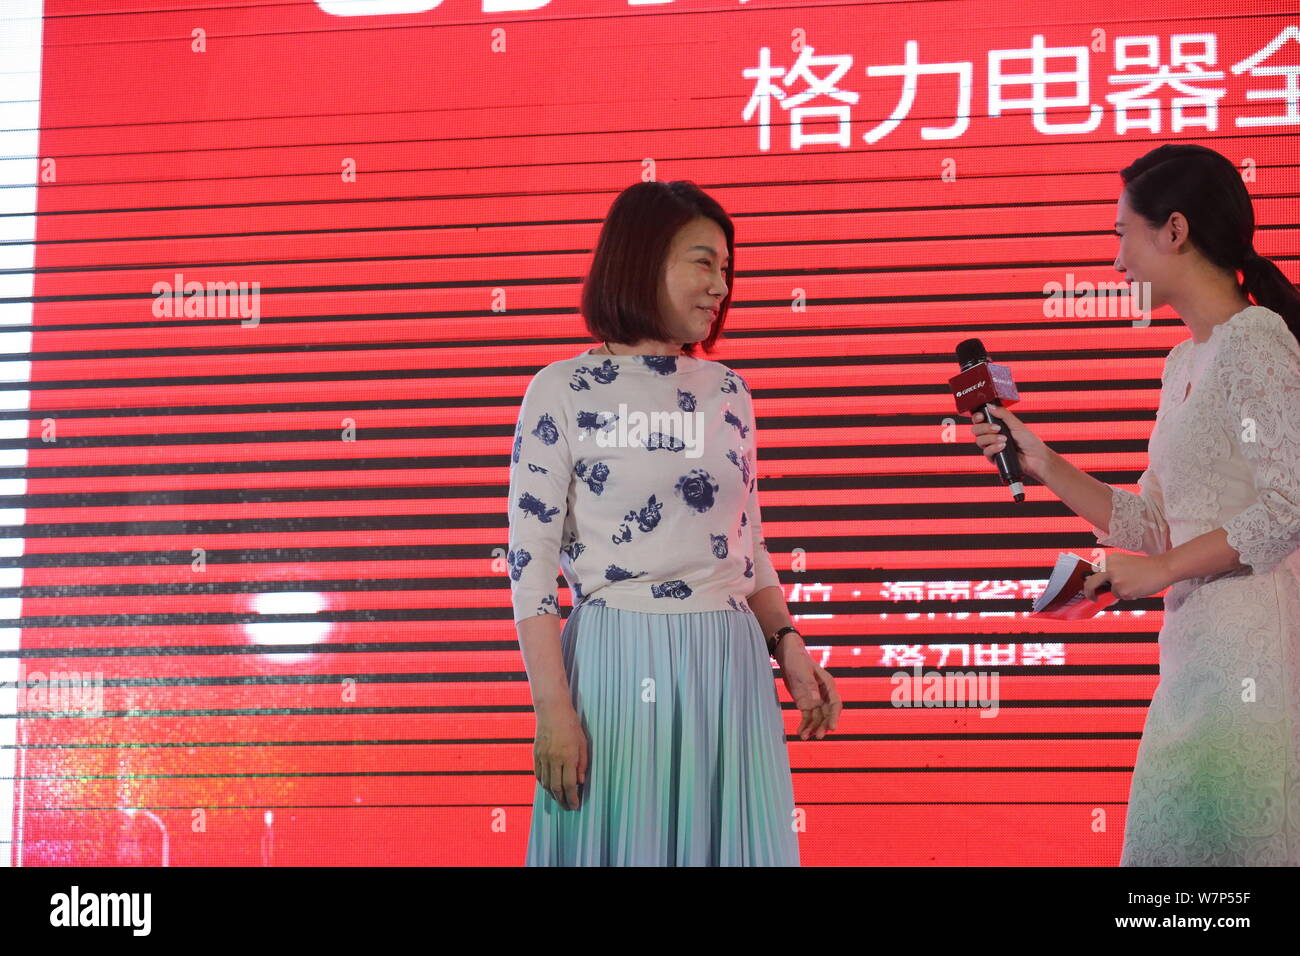 Dong Mingzhu, left, Chairwoman and President of Gree Electric Appliances Inc., is pictured as she prepares to deliver a speech during the opening cere Stock Photo